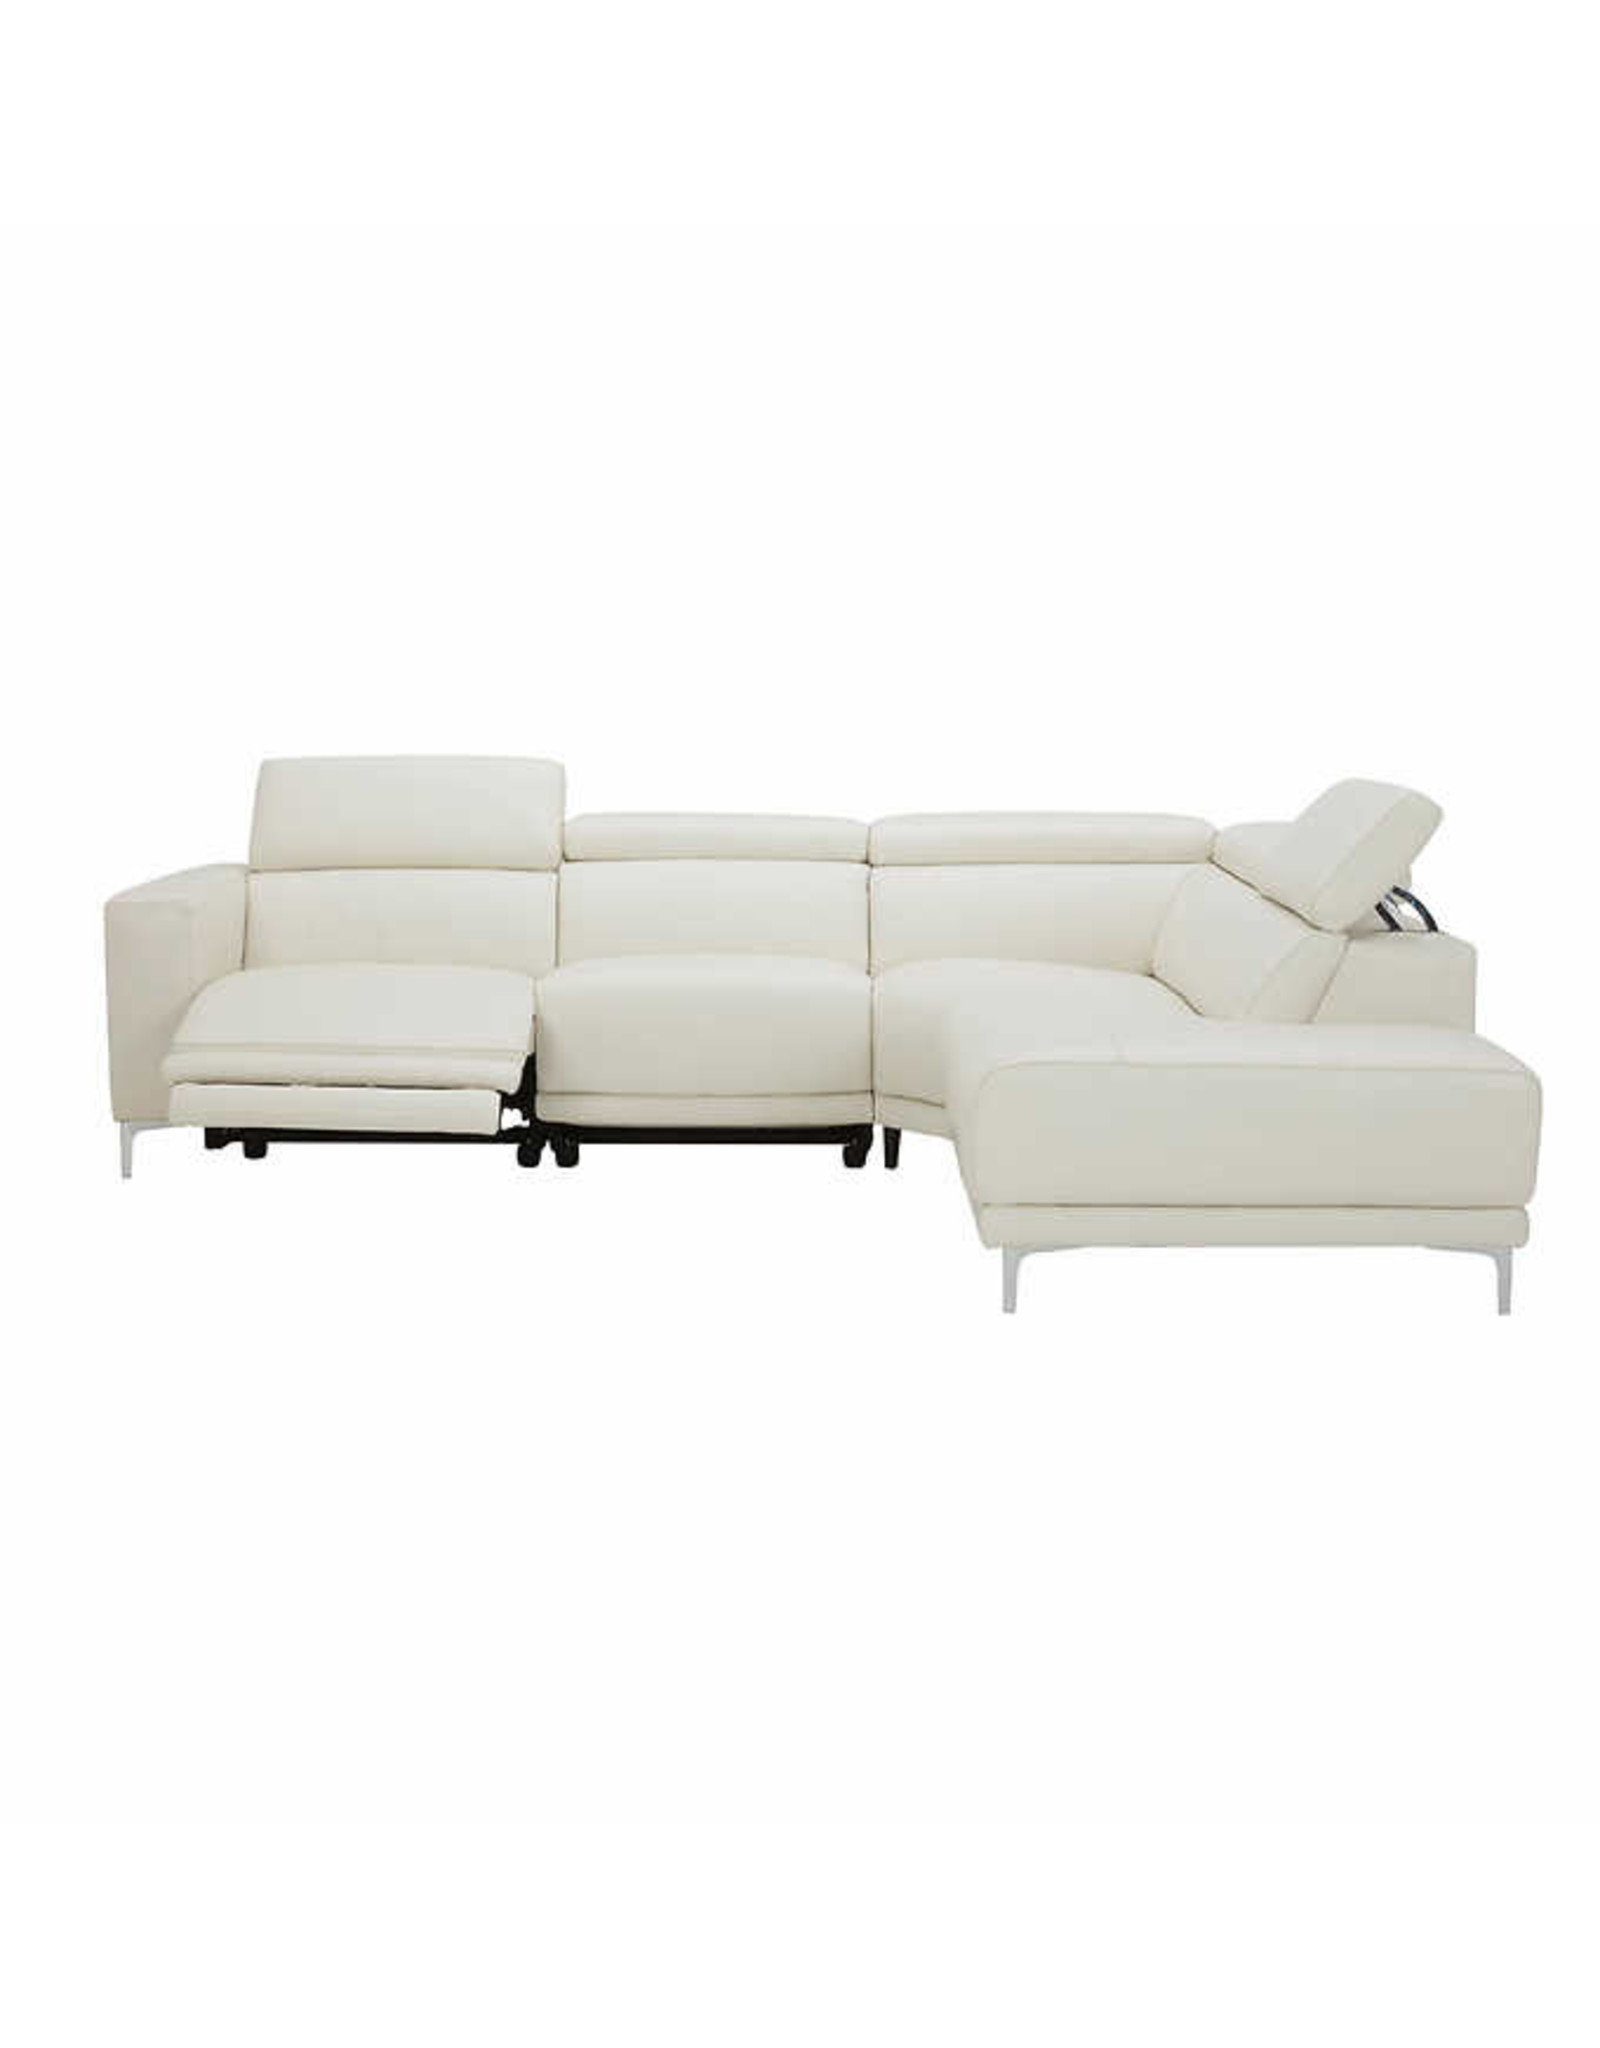 Angeline Angeline Leather Power Reclining Sectional